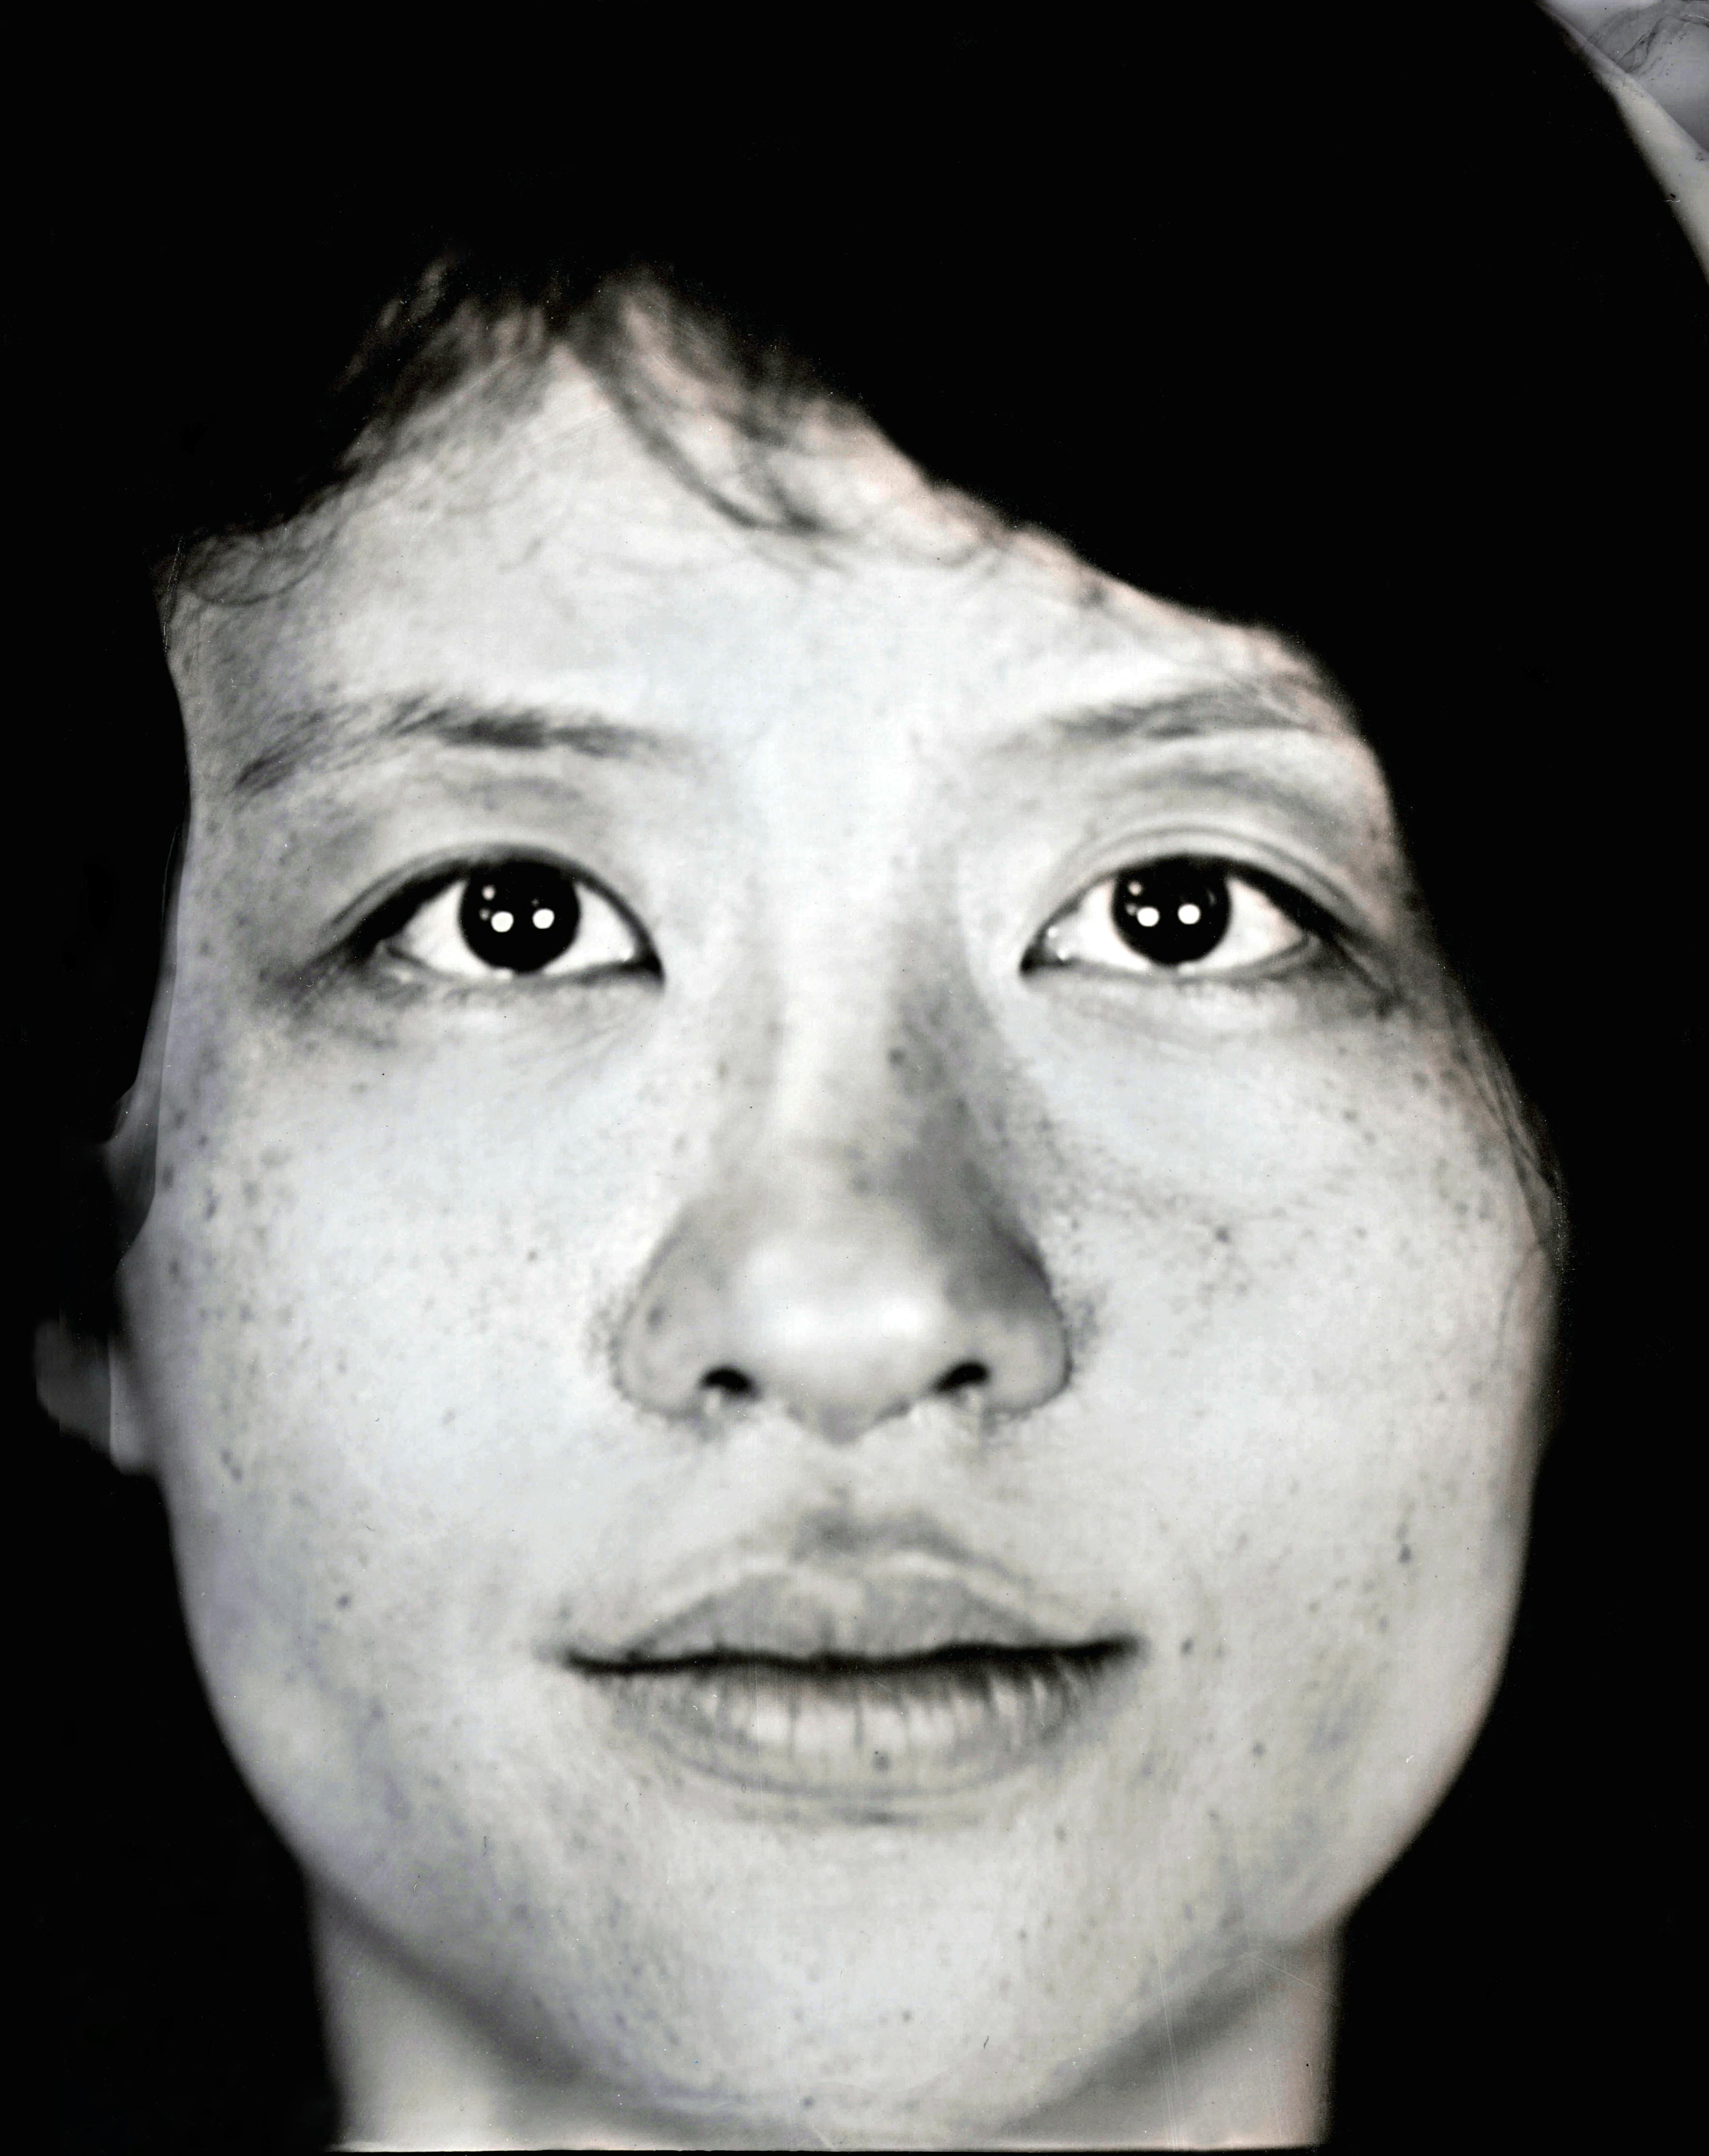 A black and white portrait of Phoebe Bei. It is closely cropped to frame her face. She is looking directly into the camera.